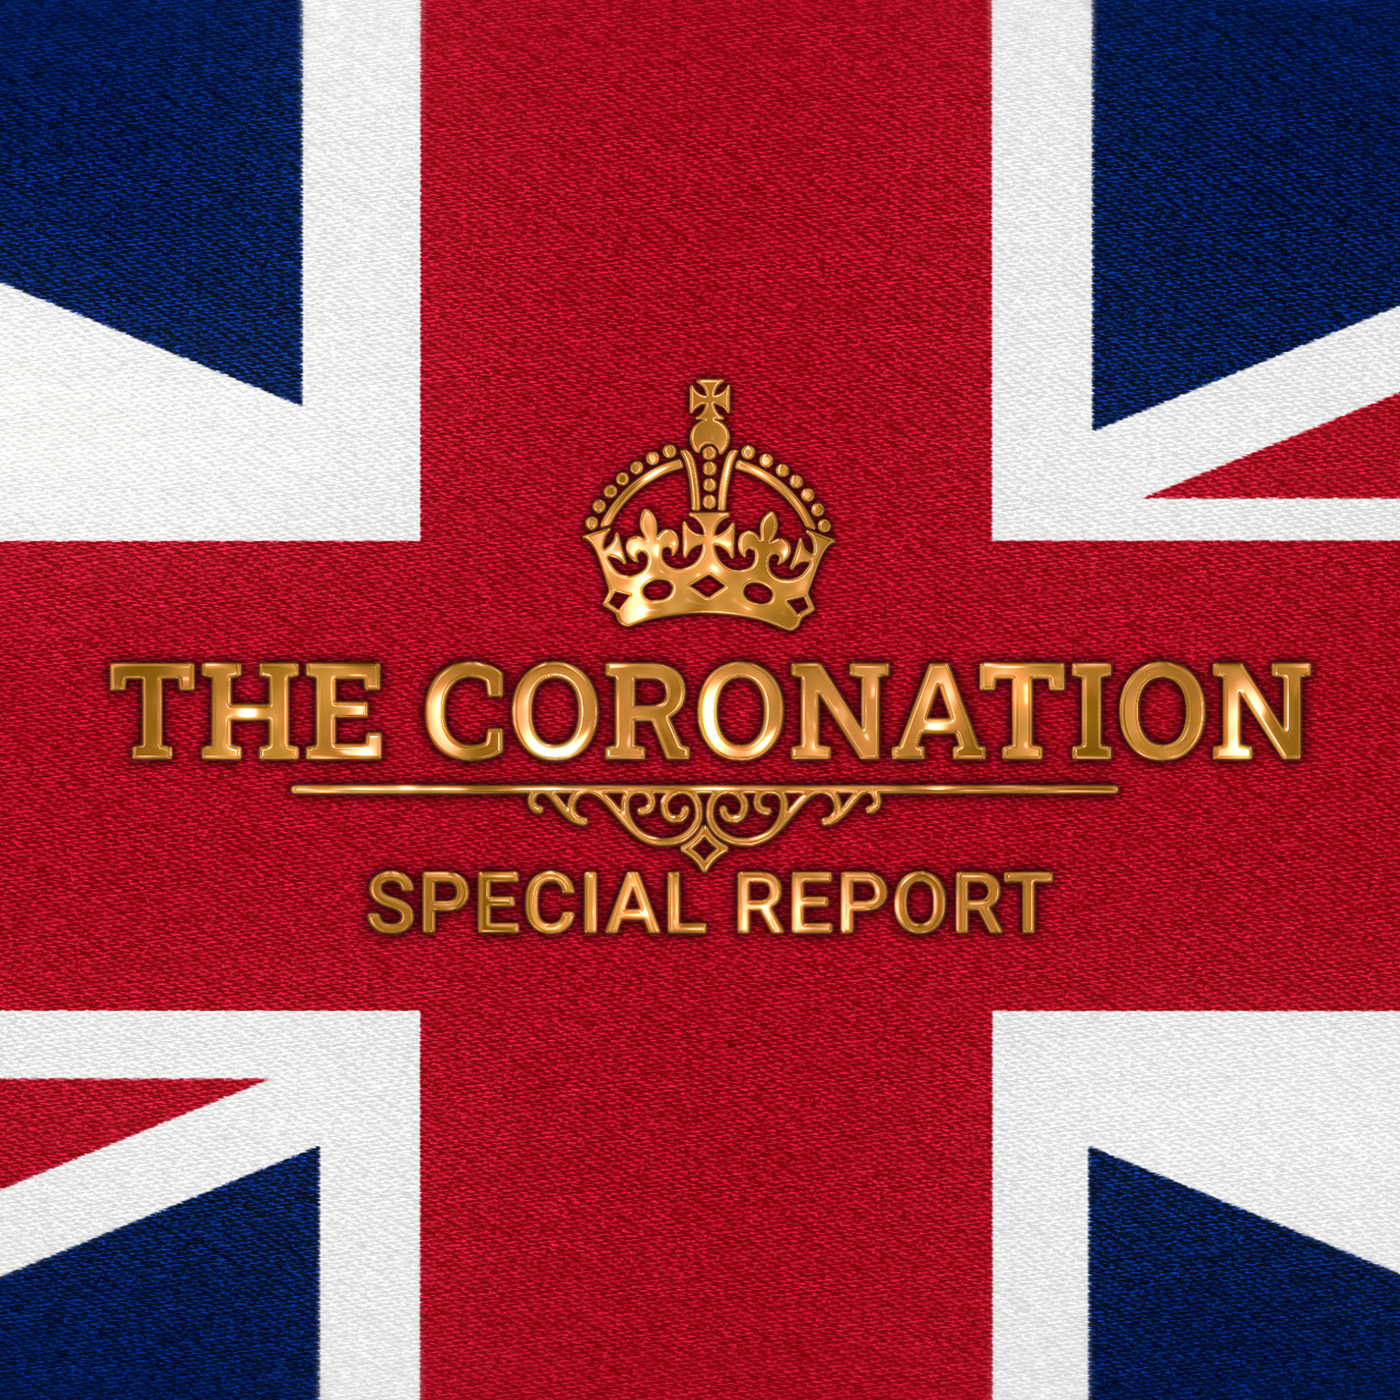 The Coronation: Special Report